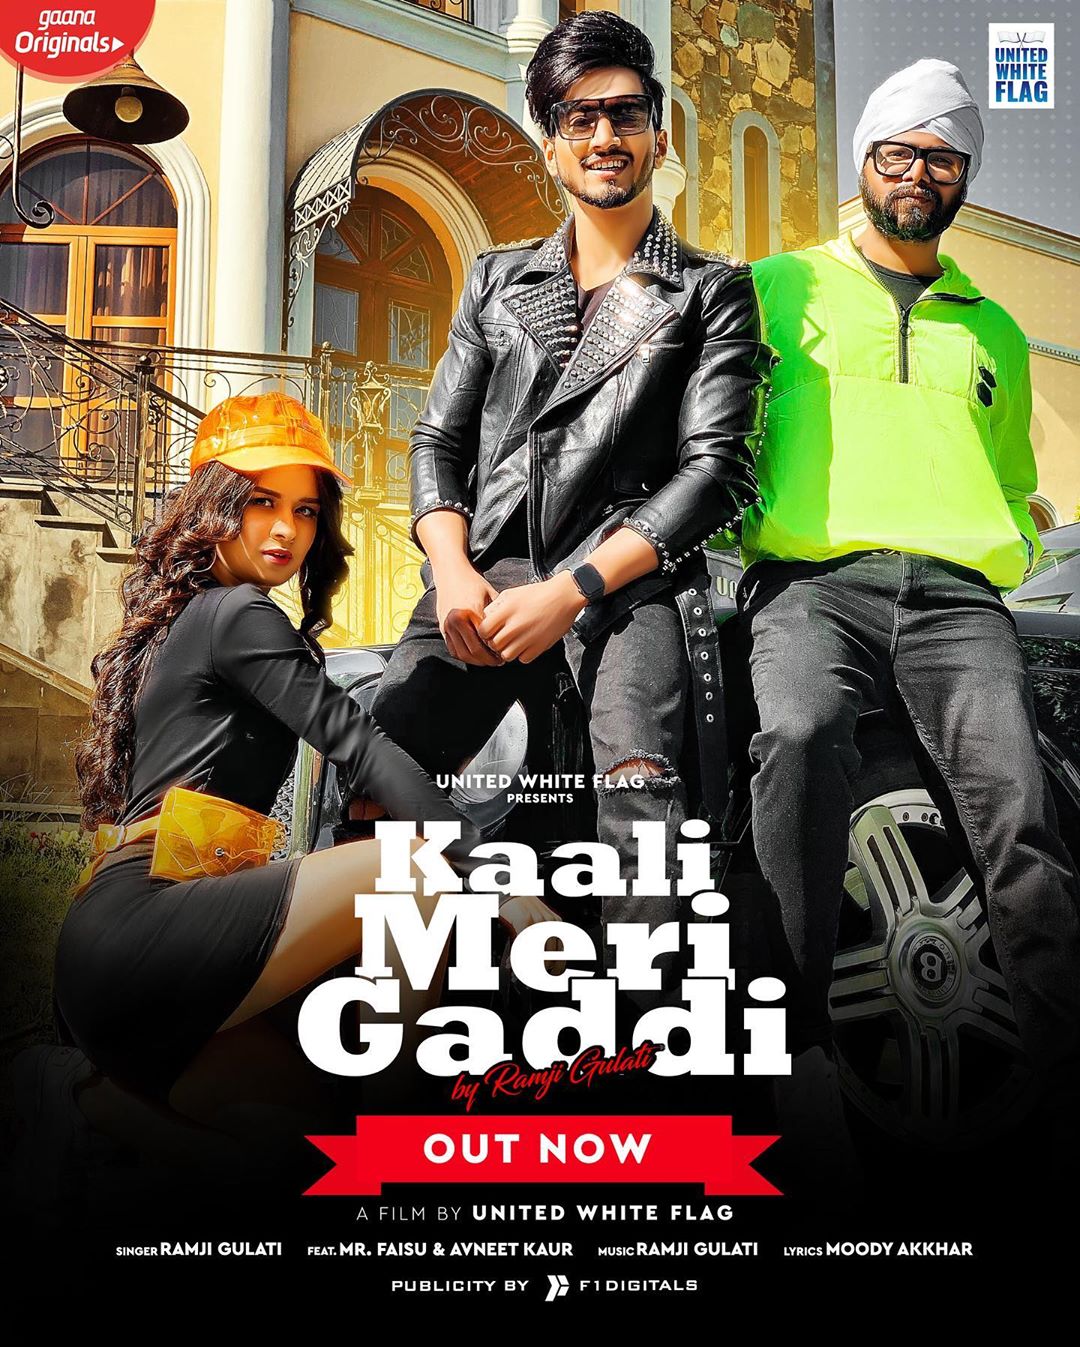 Avneet Kaur Wallpapers, Photos, Images & Pictures Hi guys my new song is out now “Kaali Meri Gaddi”